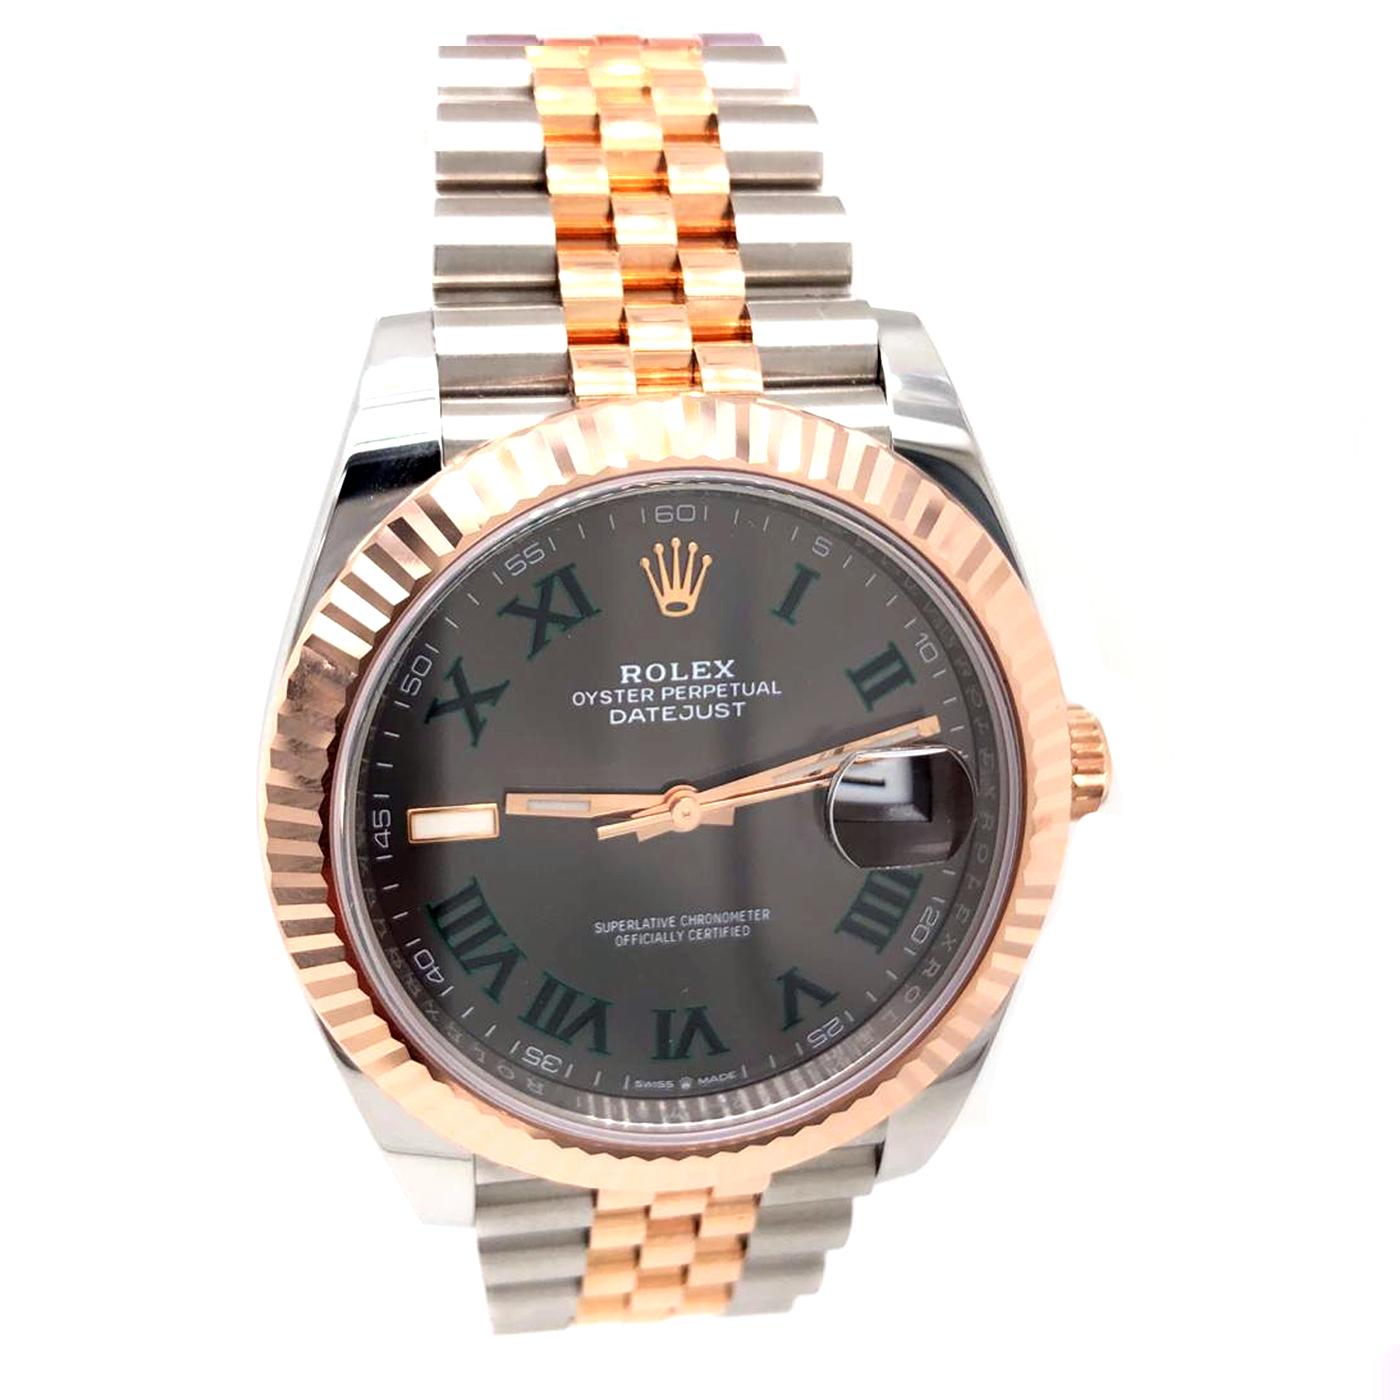 About:
Brand: Rolex
Model: Datejust II
Movement: Automatic
Year of production: 2020
Case Material: Gold/Steel
Bracelet Material: Gold/Steel
Scope of Delivery: Original Box, Original Papers
Gender: Men's watch/Unisex
Movement: